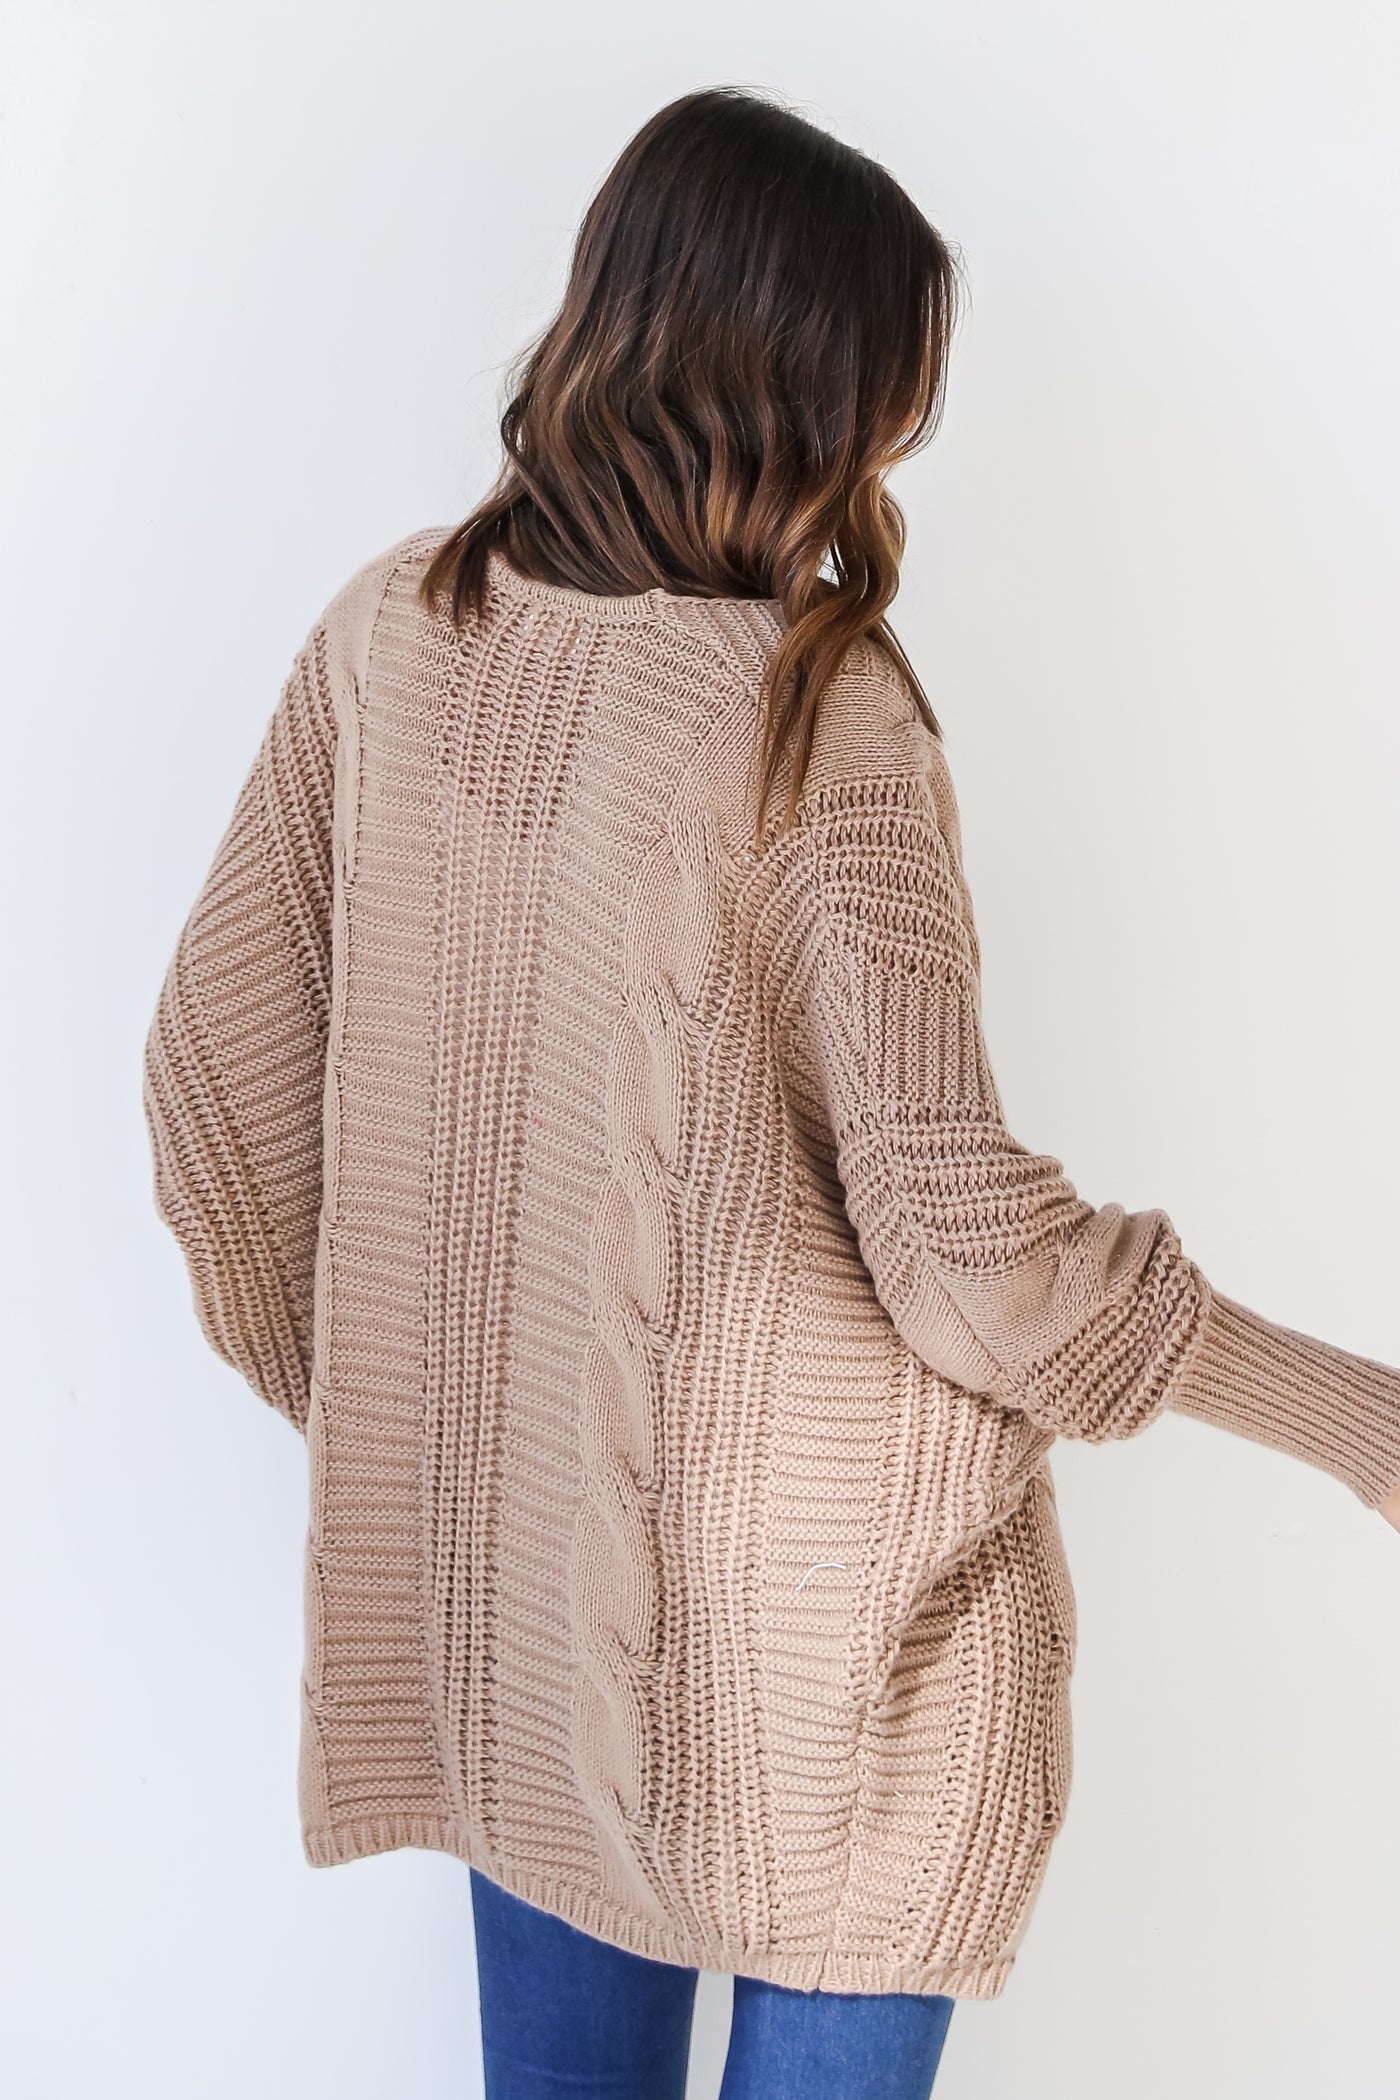 Sweater Cardigan in taupe back view